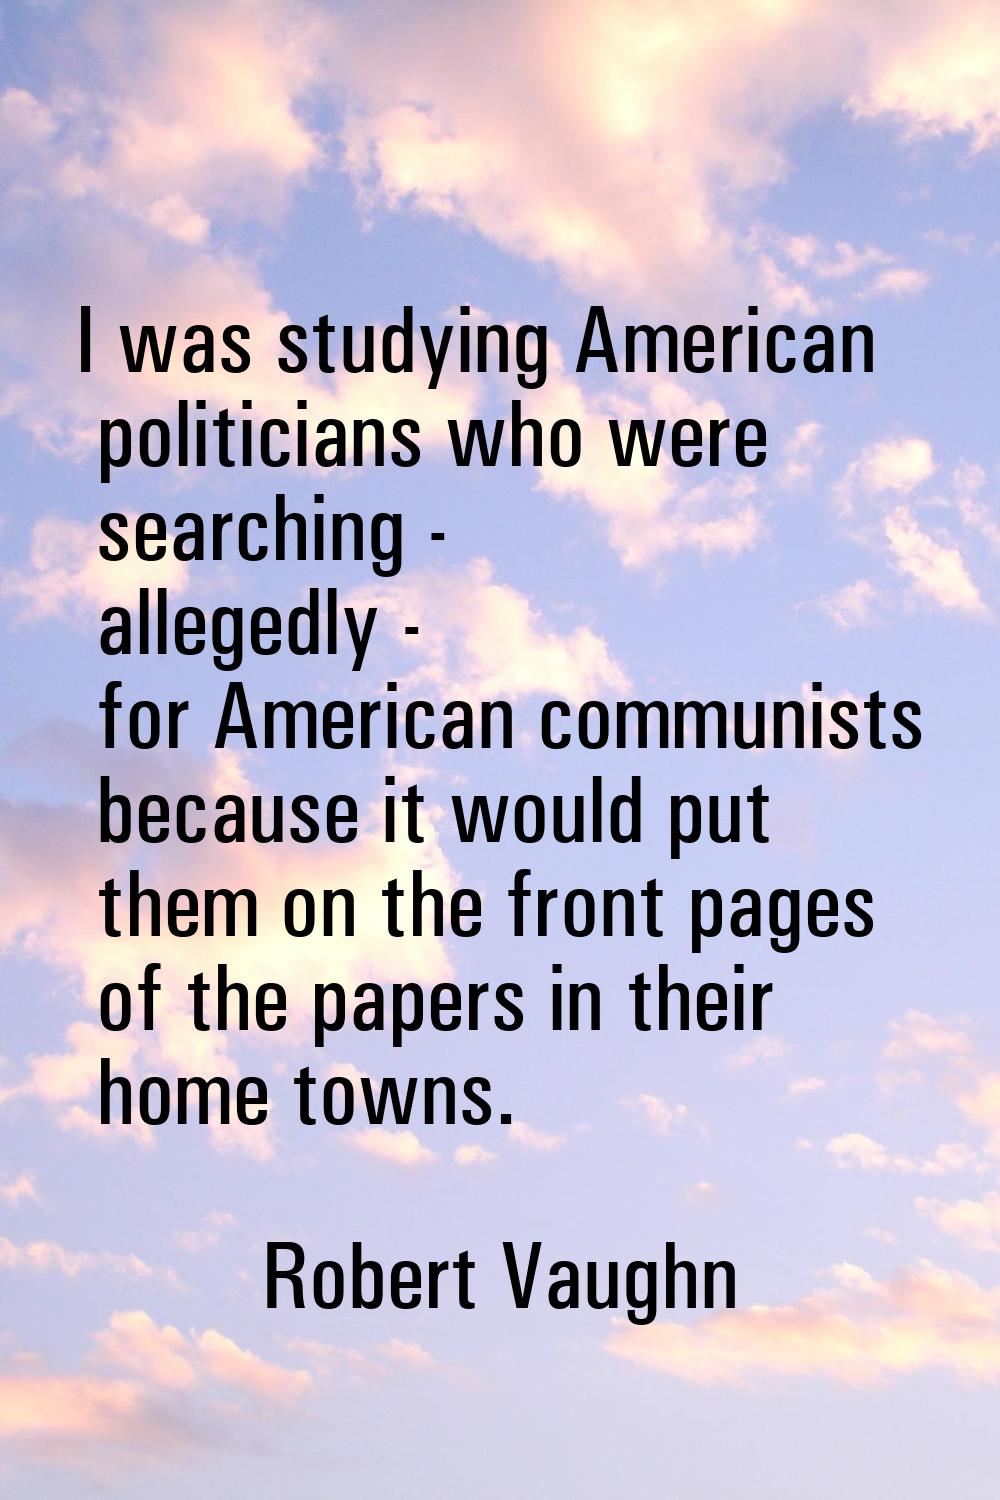 I was studying American politicians who were searching - allegedly - for American communists becaus